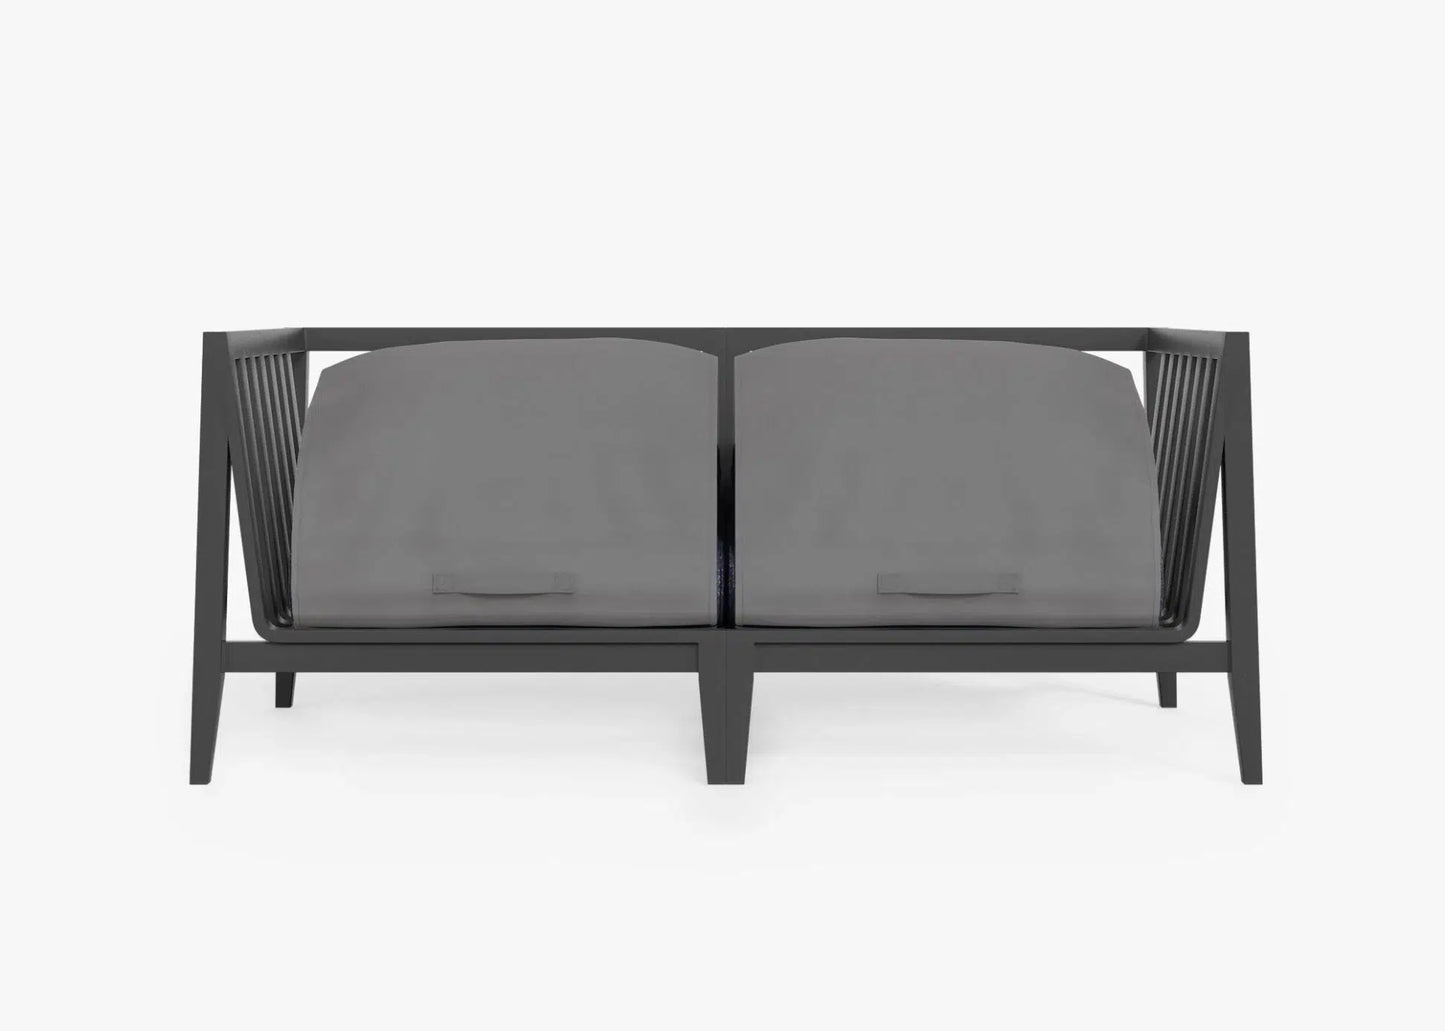 Live Outer 69" Charcoal Aluminum Outdoor Loveseat With Deep Sea Navy Cushion